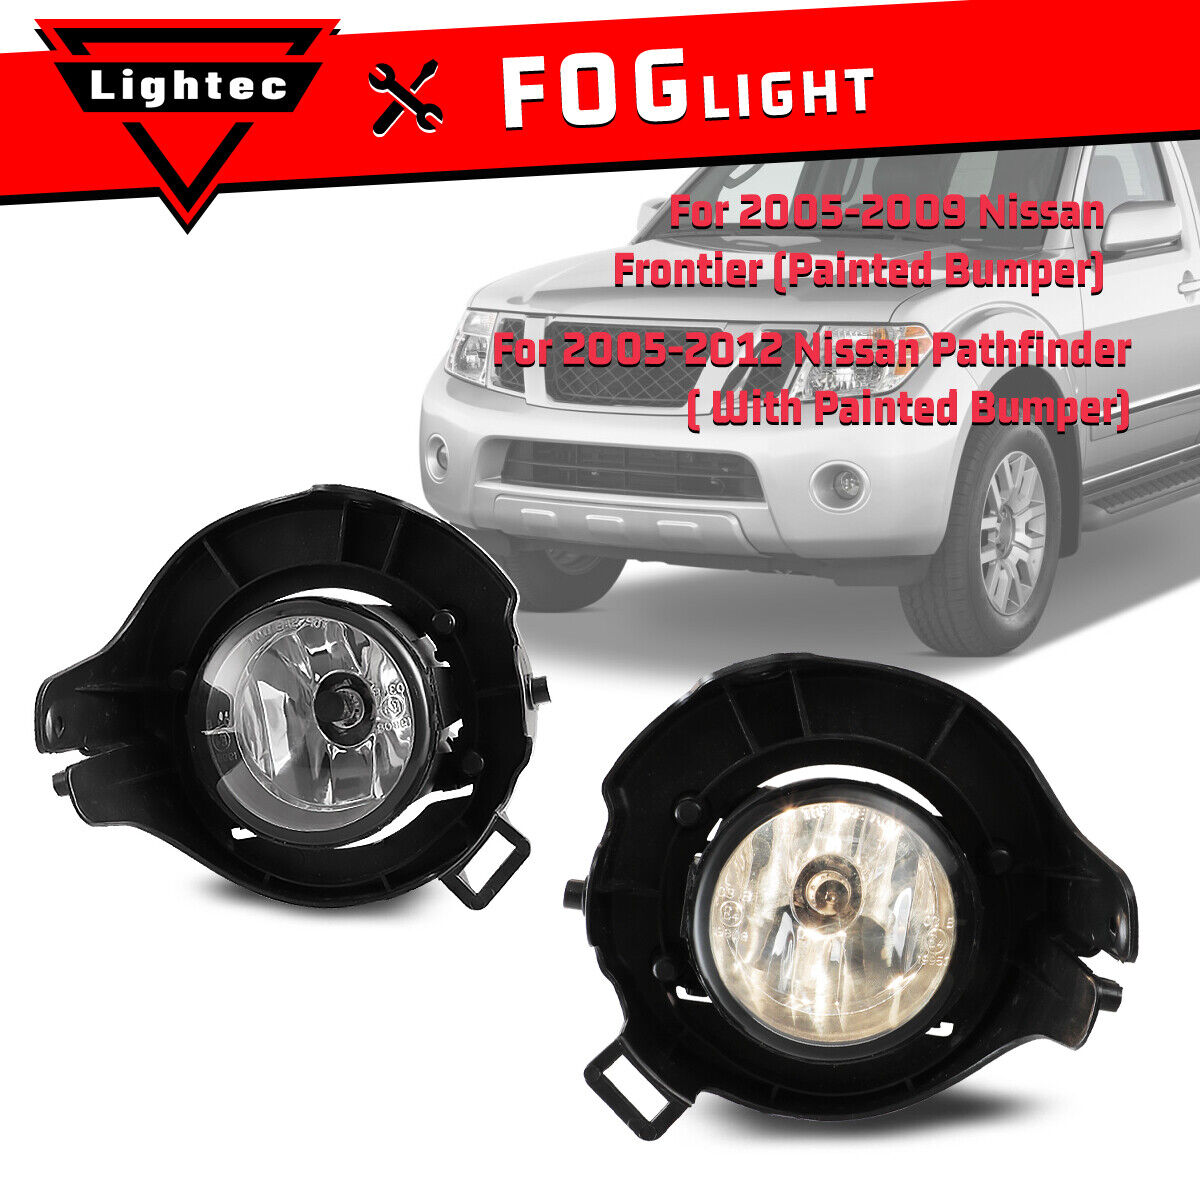 Fog Lights for 2005-2012 Nissan Pathfinder w/ Painted Bumper Clear Lamp 1 Pair